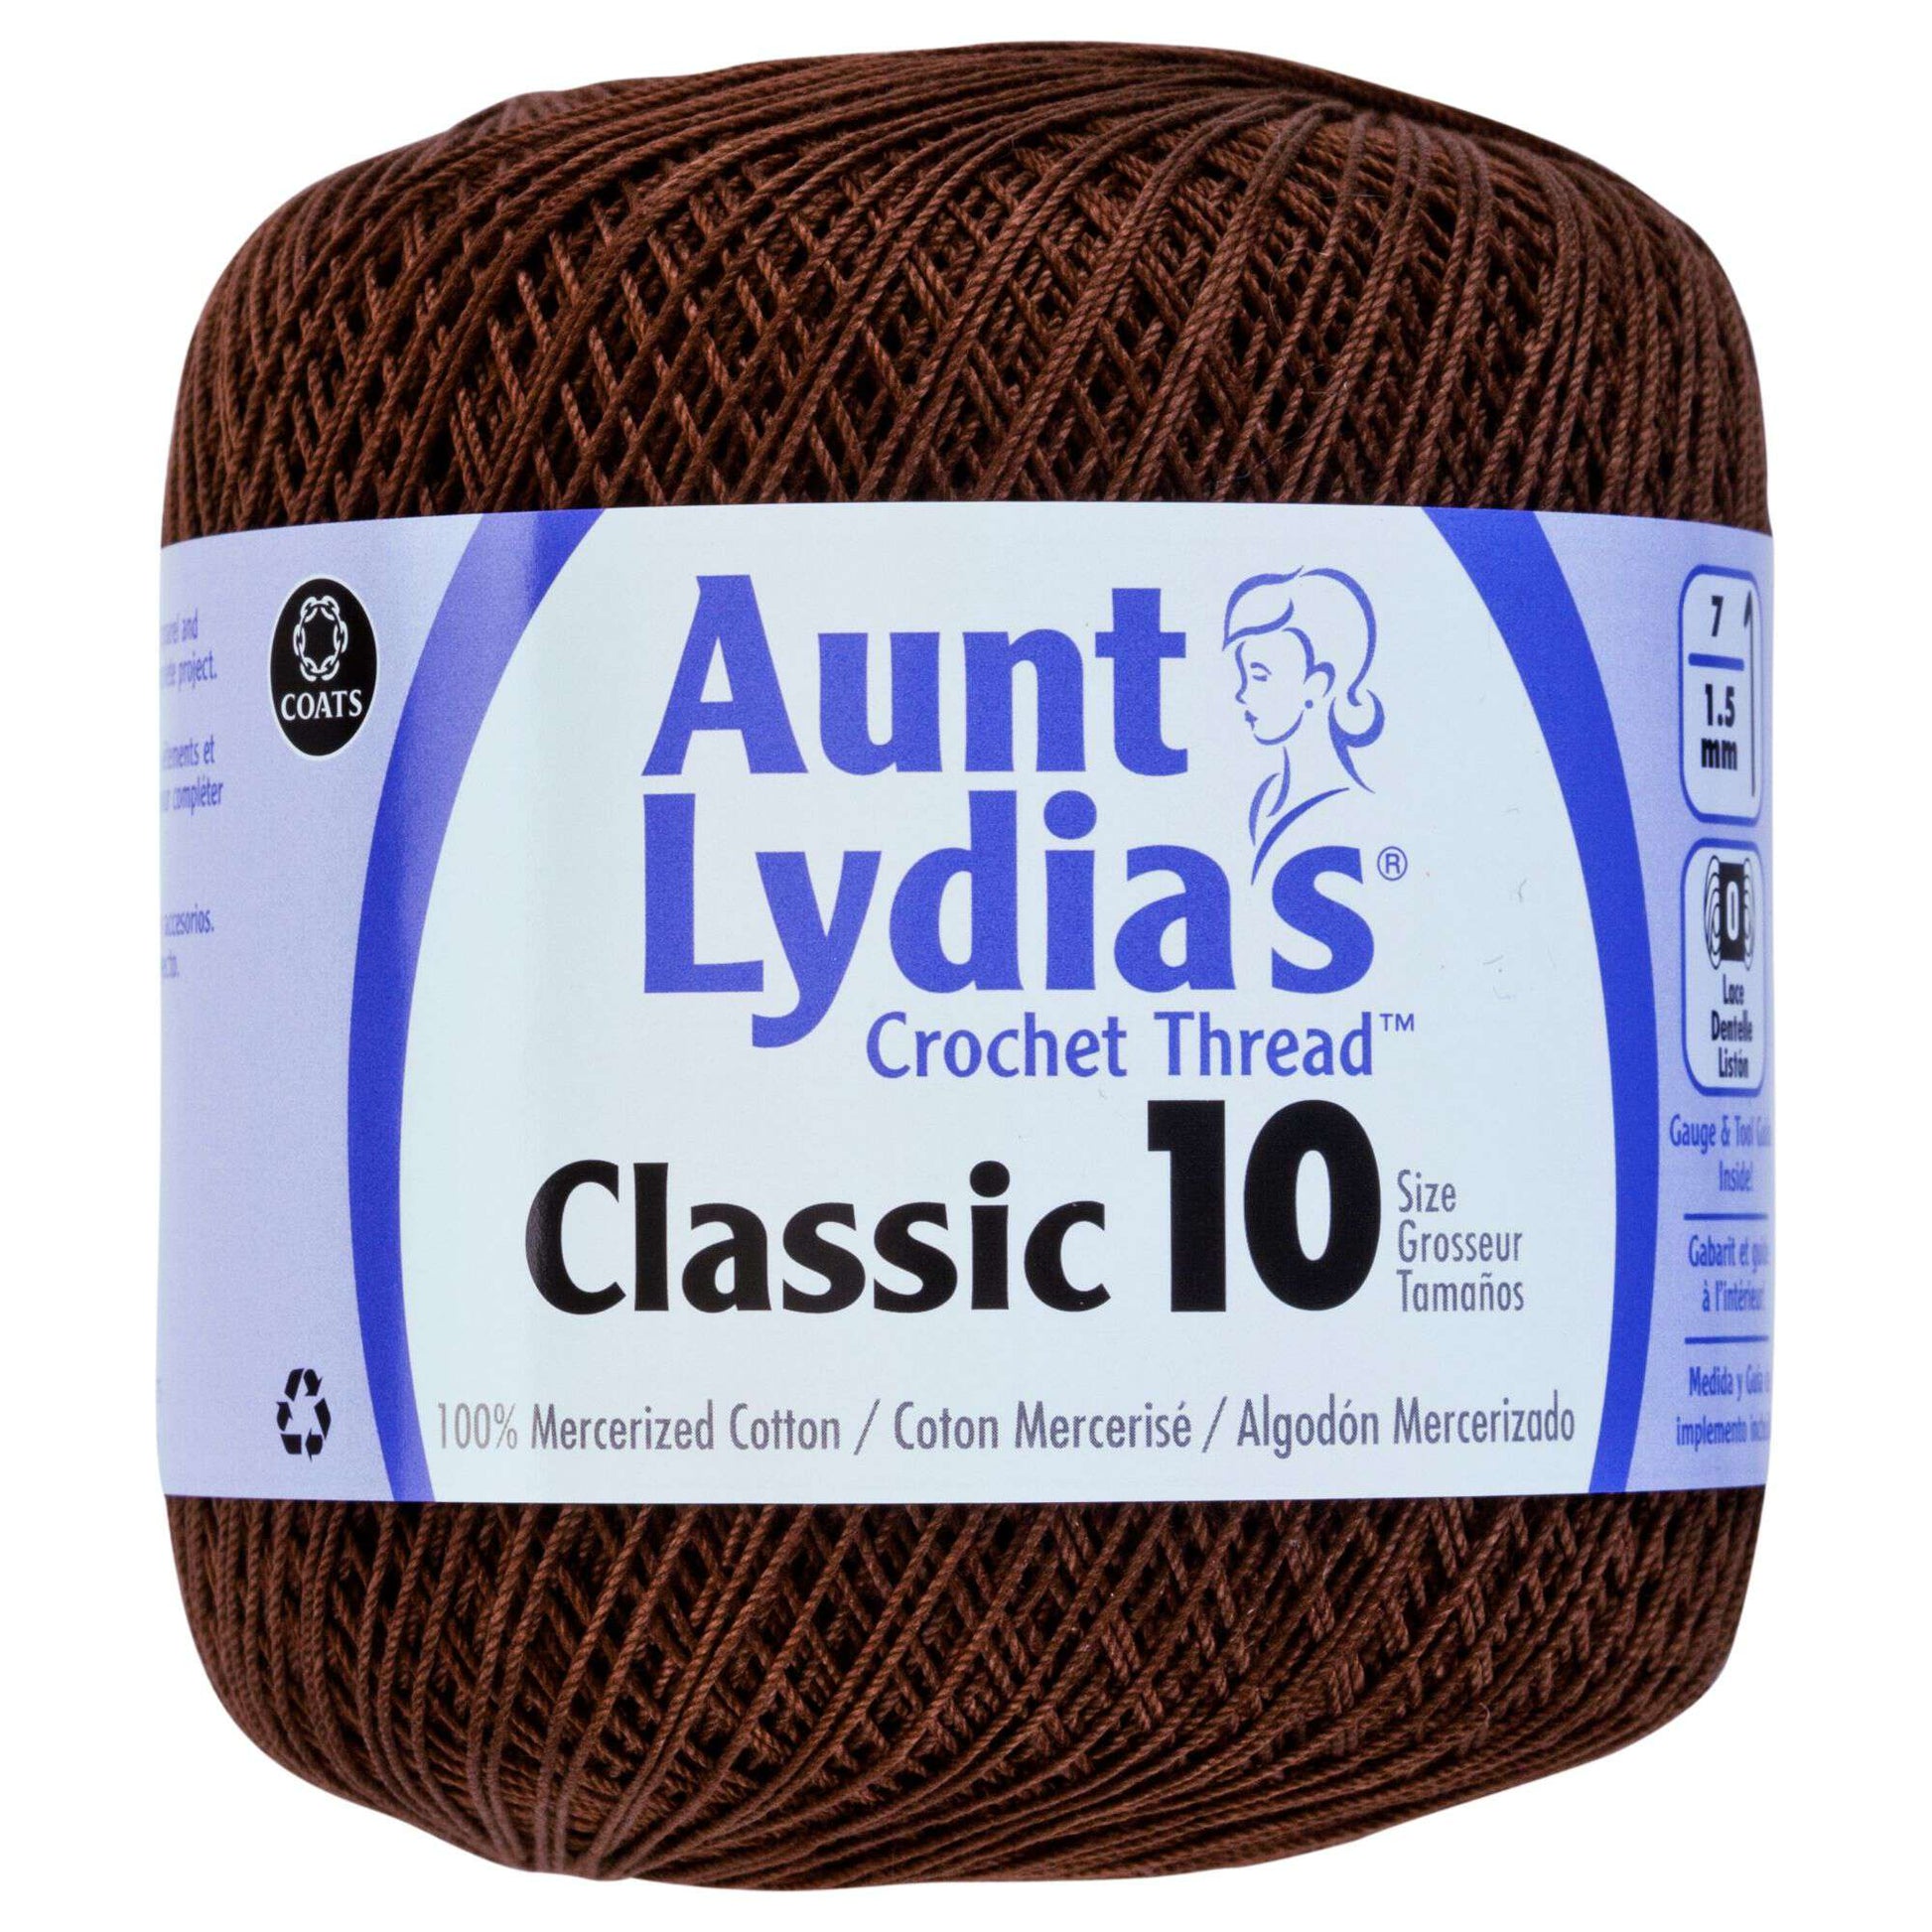 Aunt Lydia's Classic Crochet Thread Size 10 - Clearance shades Fudge Brown